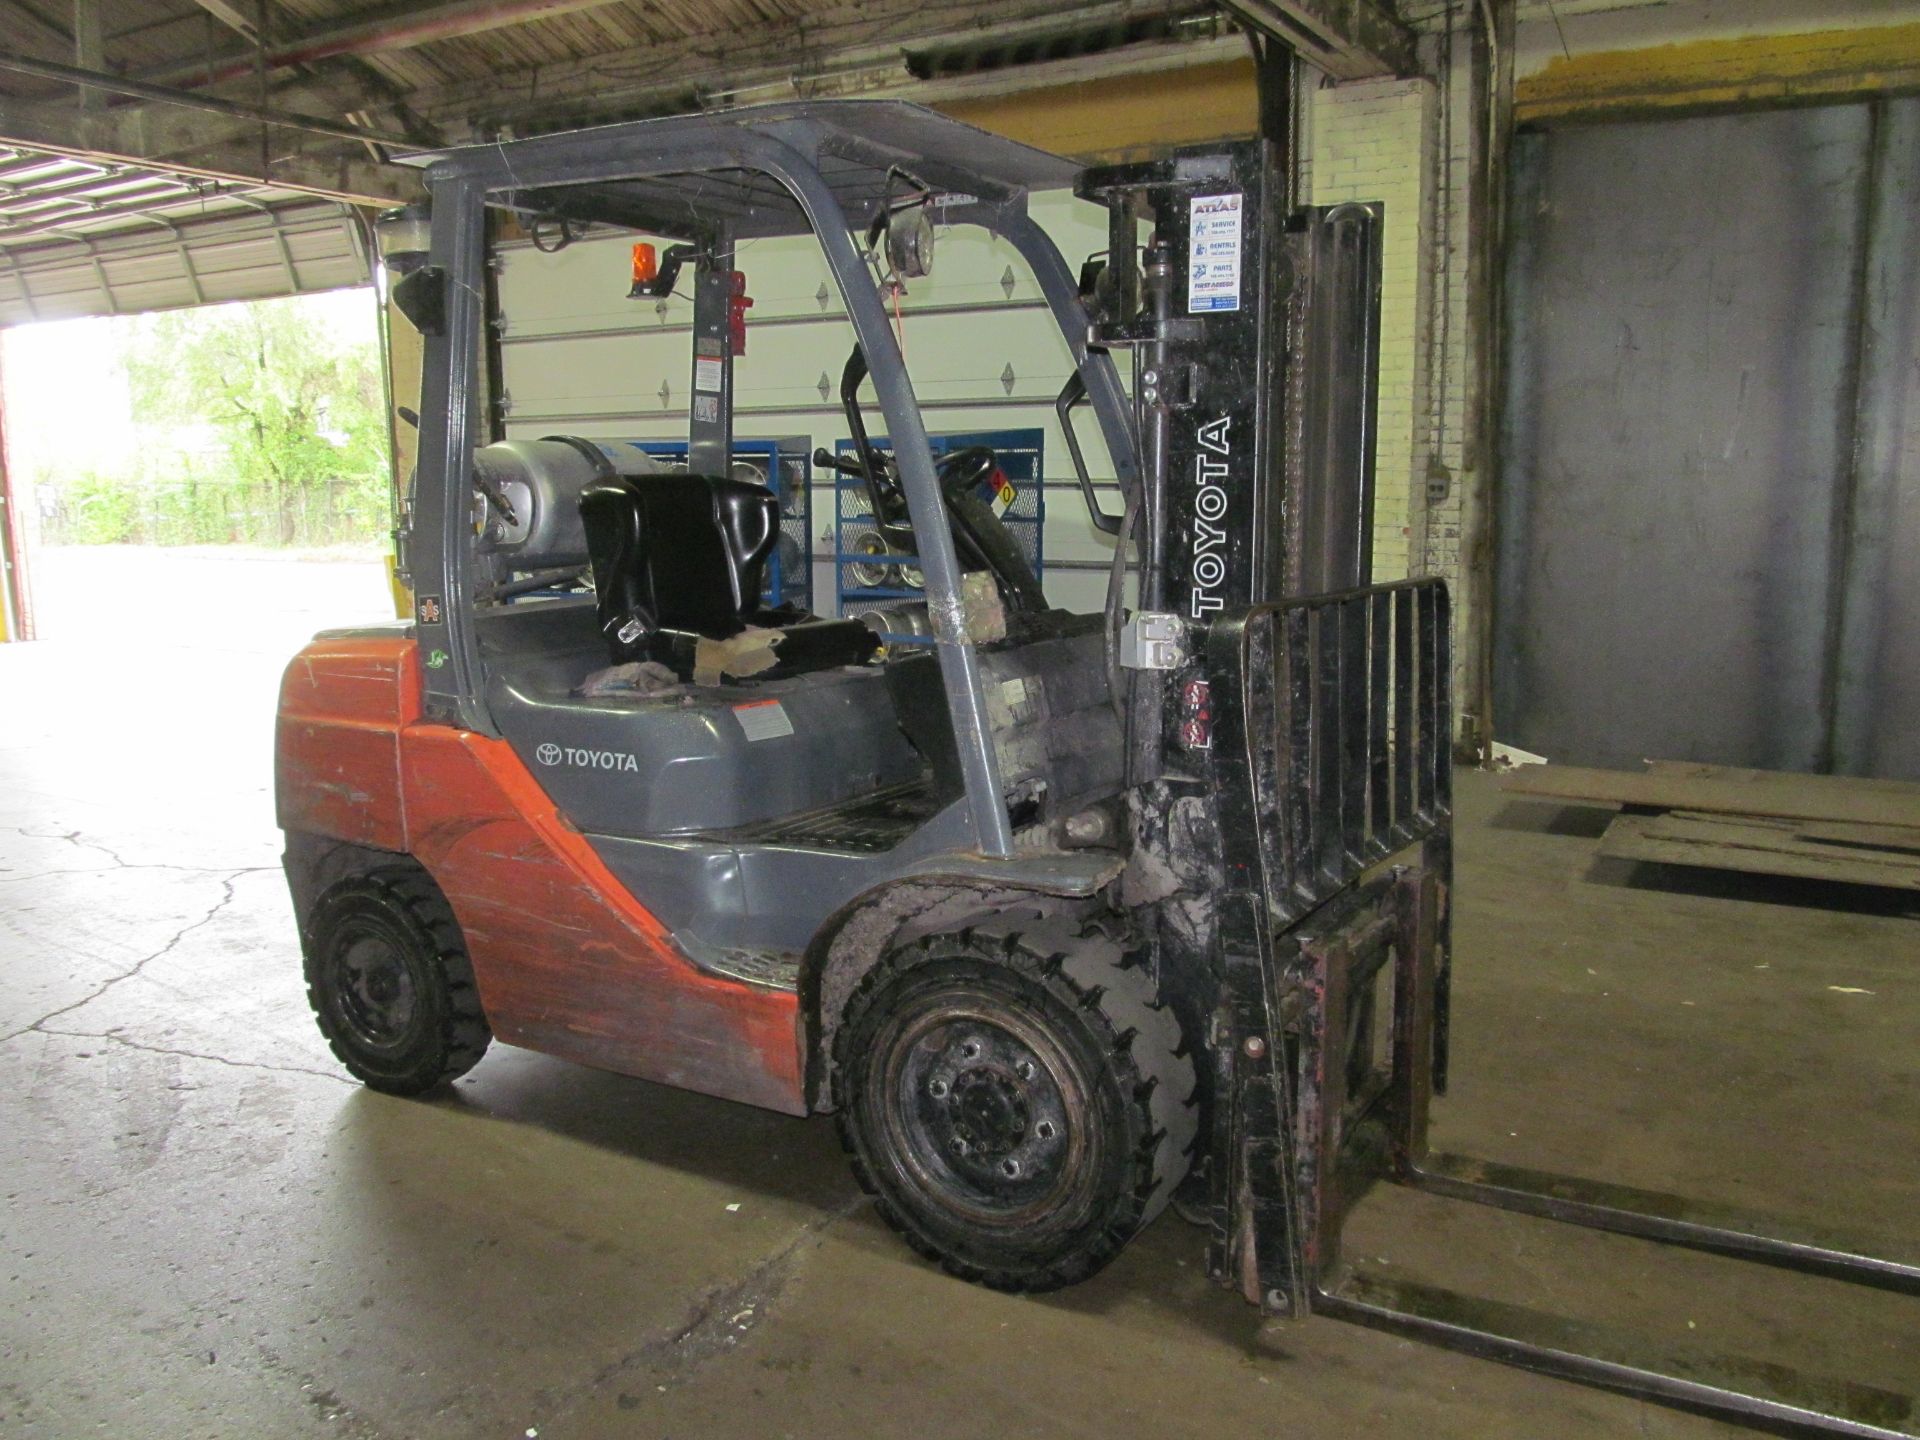 Toyota 5,820 lb. Cap. Model 8FGU30 LP Fork Lift Truck, S/N: 35001; with 2-Stage Mast, Side Shift, - Image 4 of 7